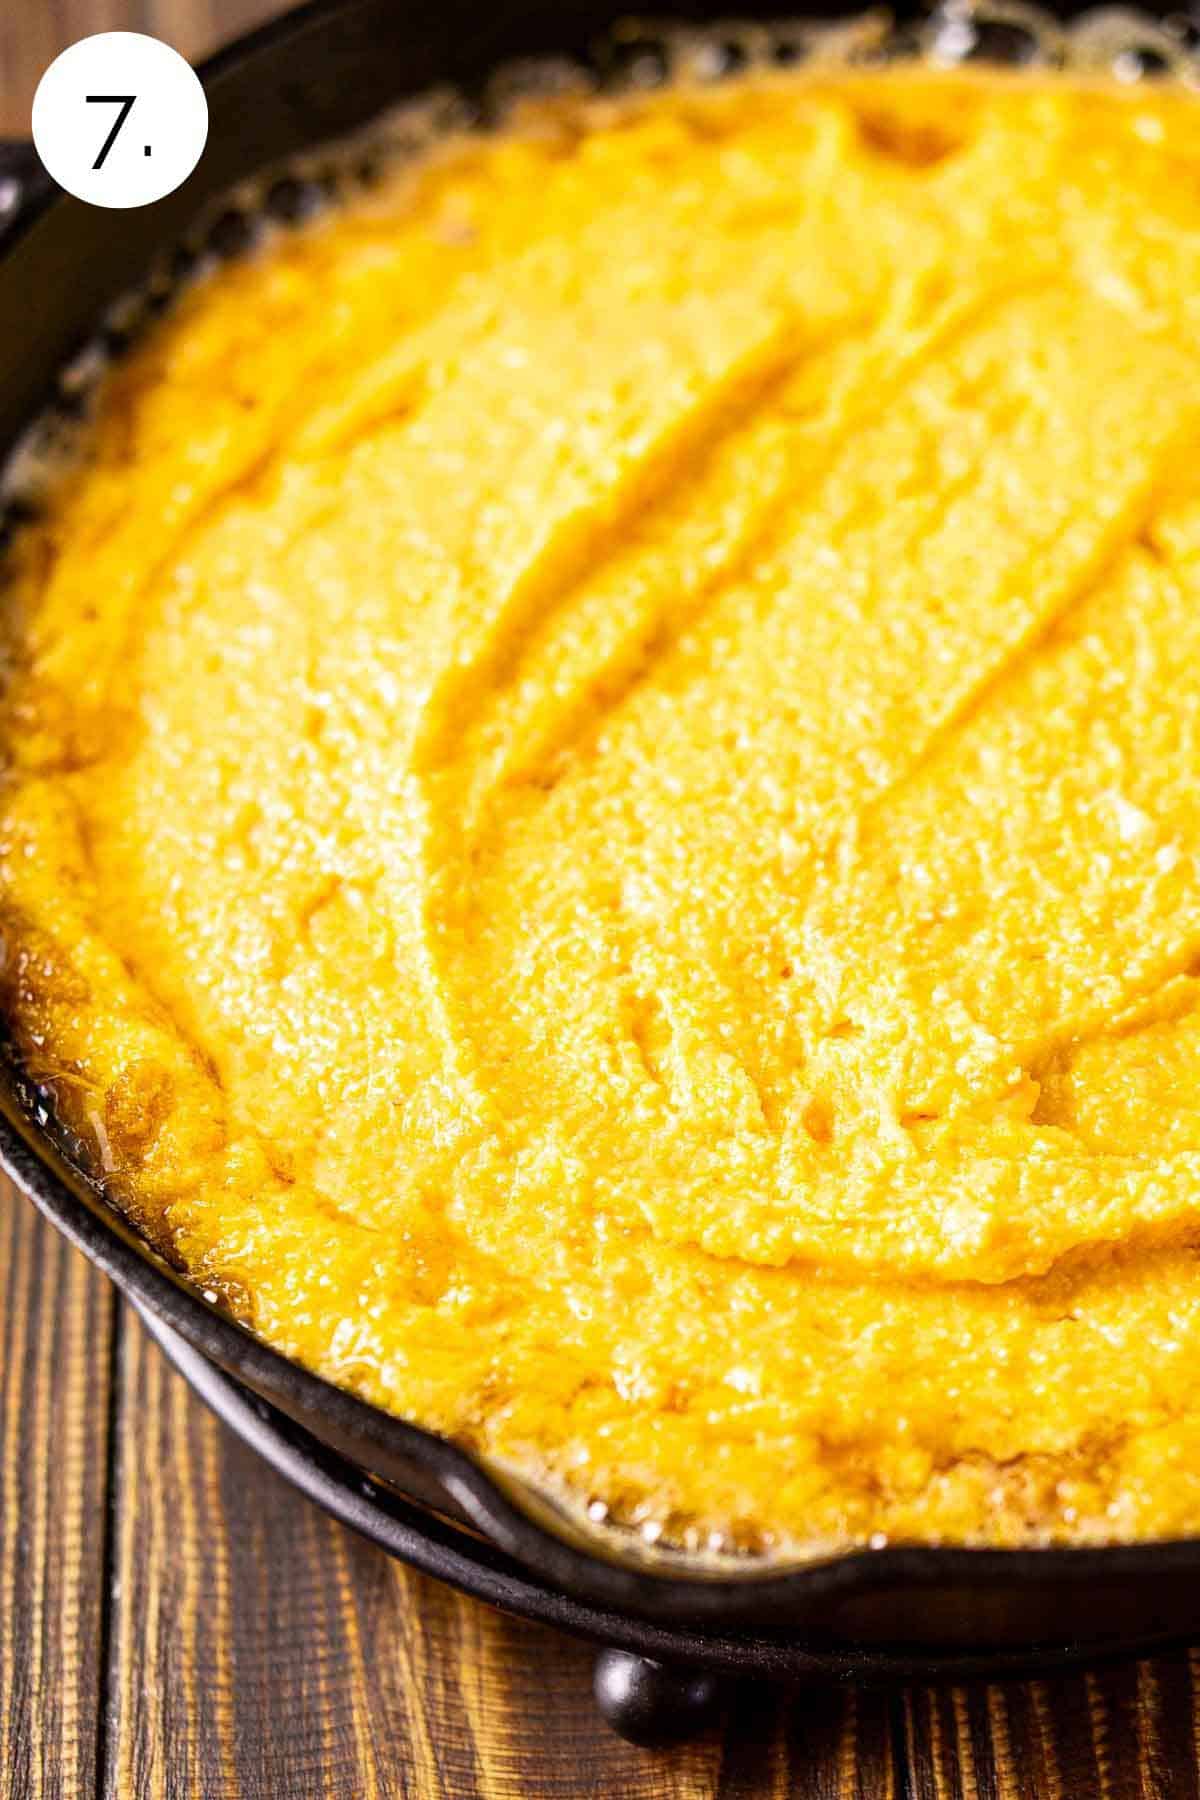 The cornbread batter and melted butter in a black cast-iron skillet on a trivet before it goes in the oven.